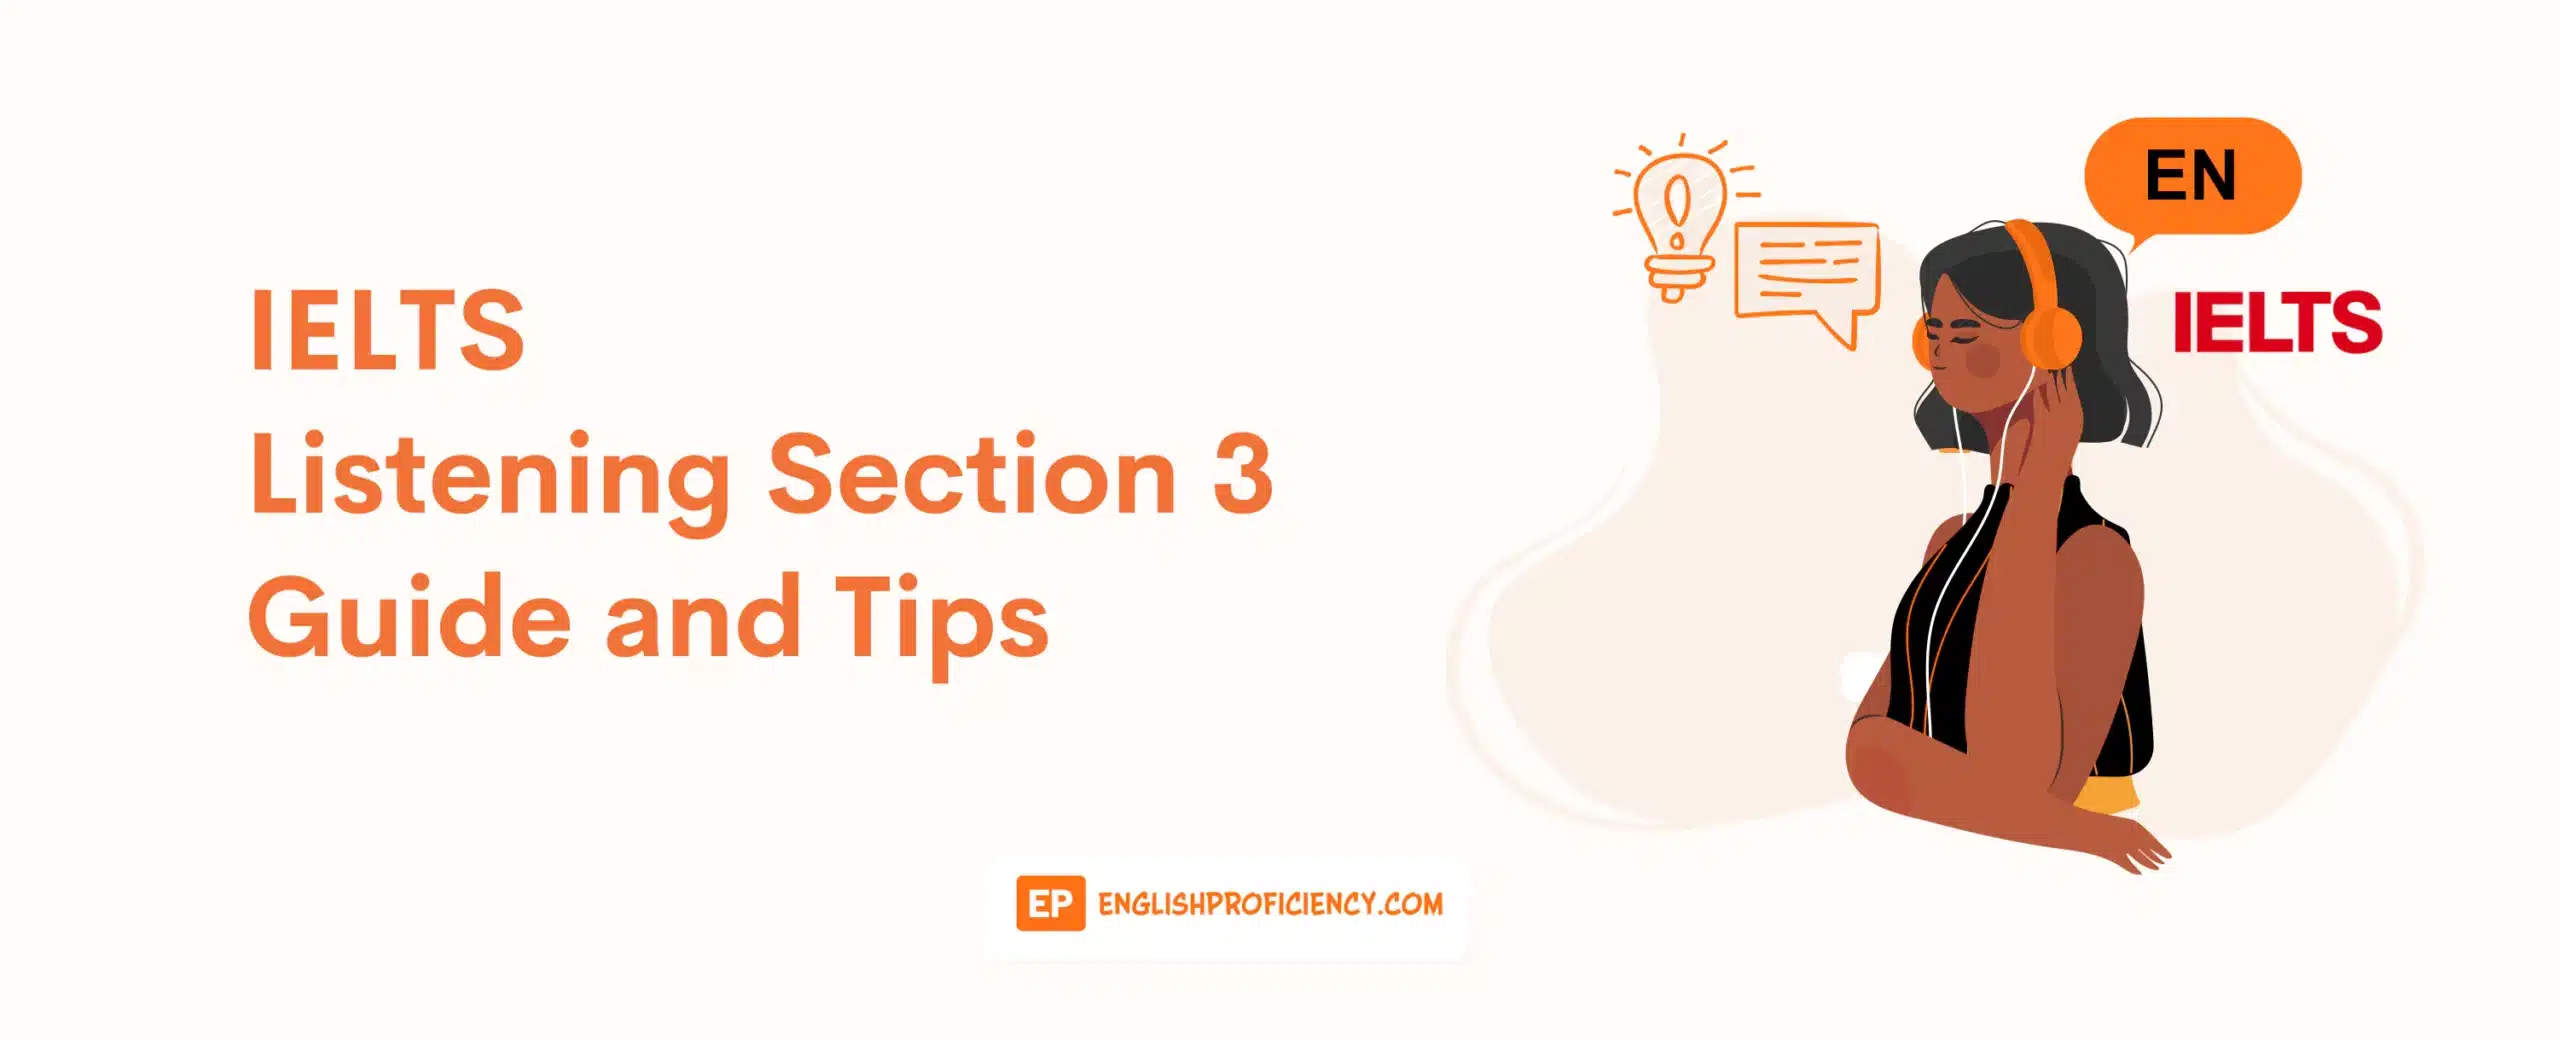 IELTS Listening Section 3 Guide and Tips